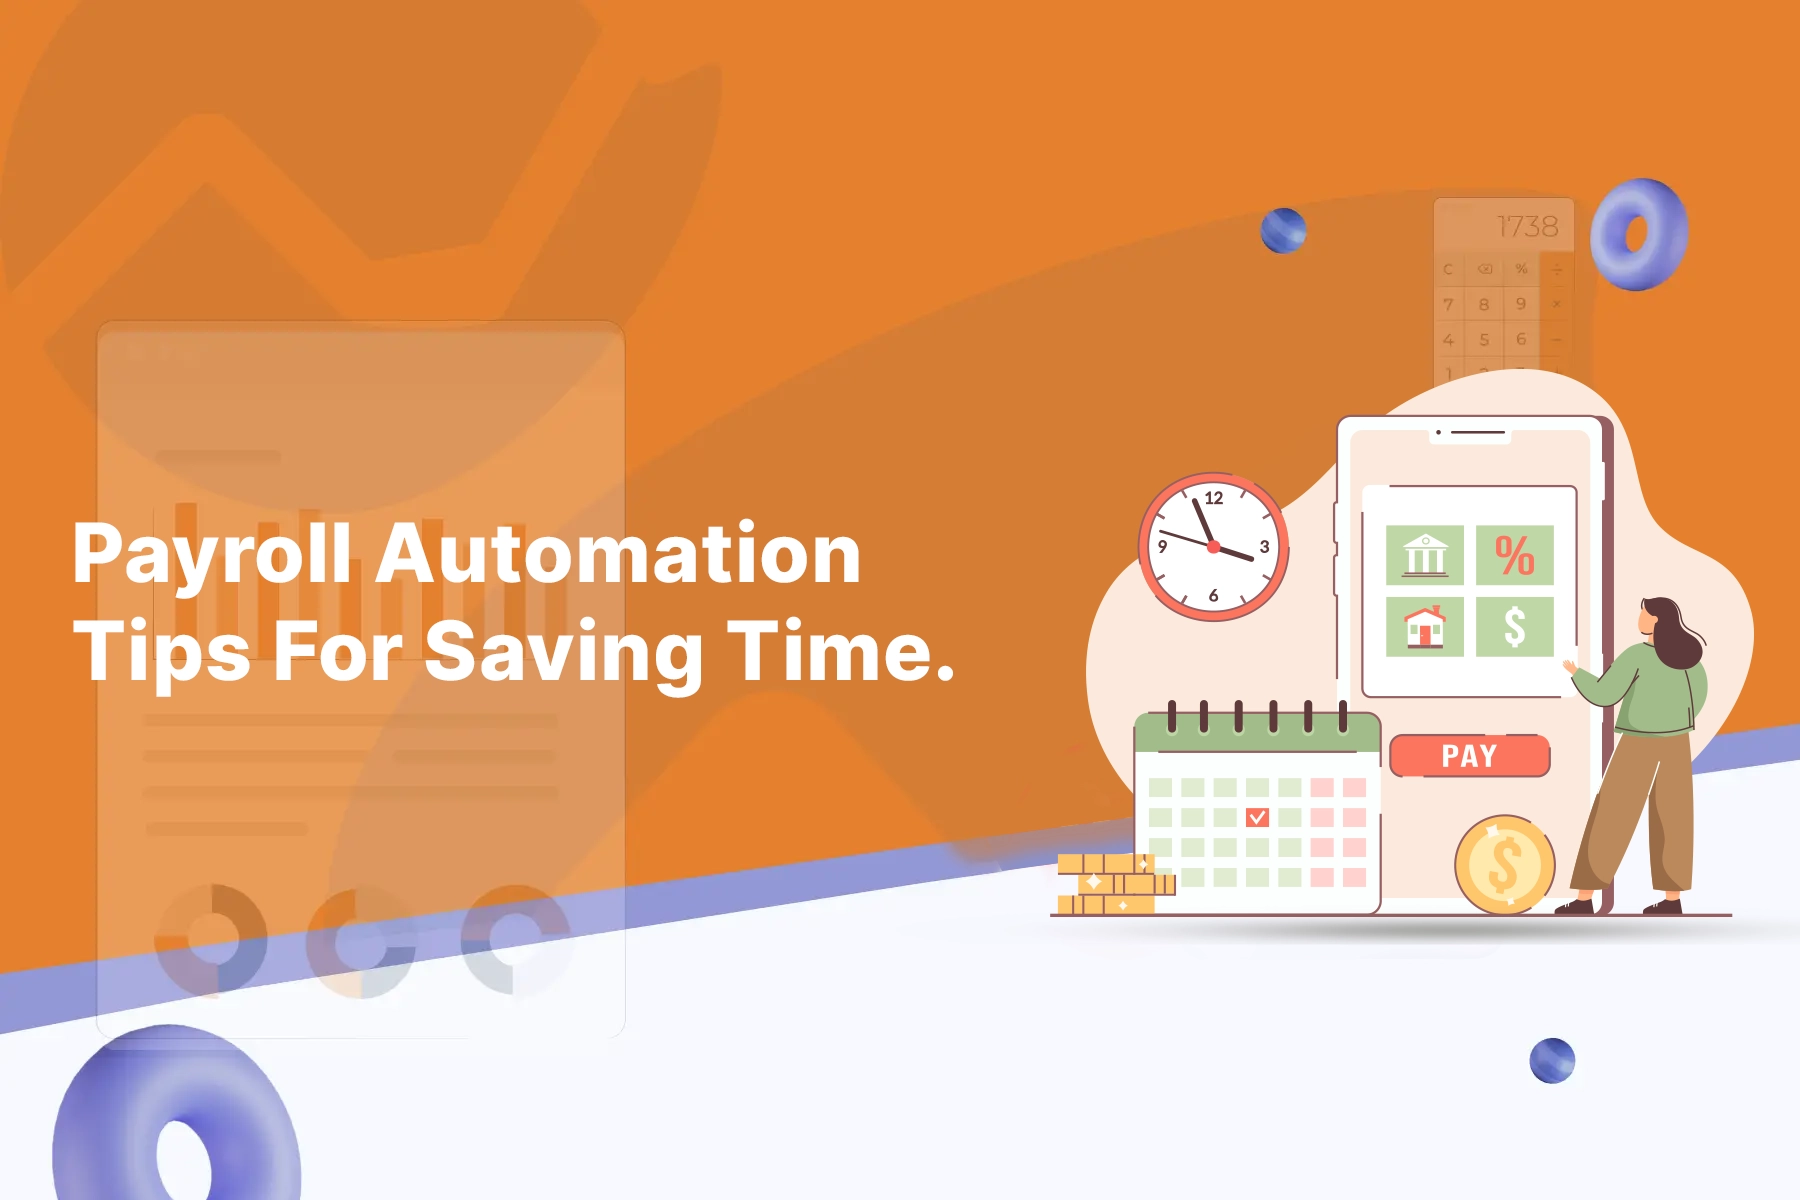 Payroll Automation Tips For Saving Time